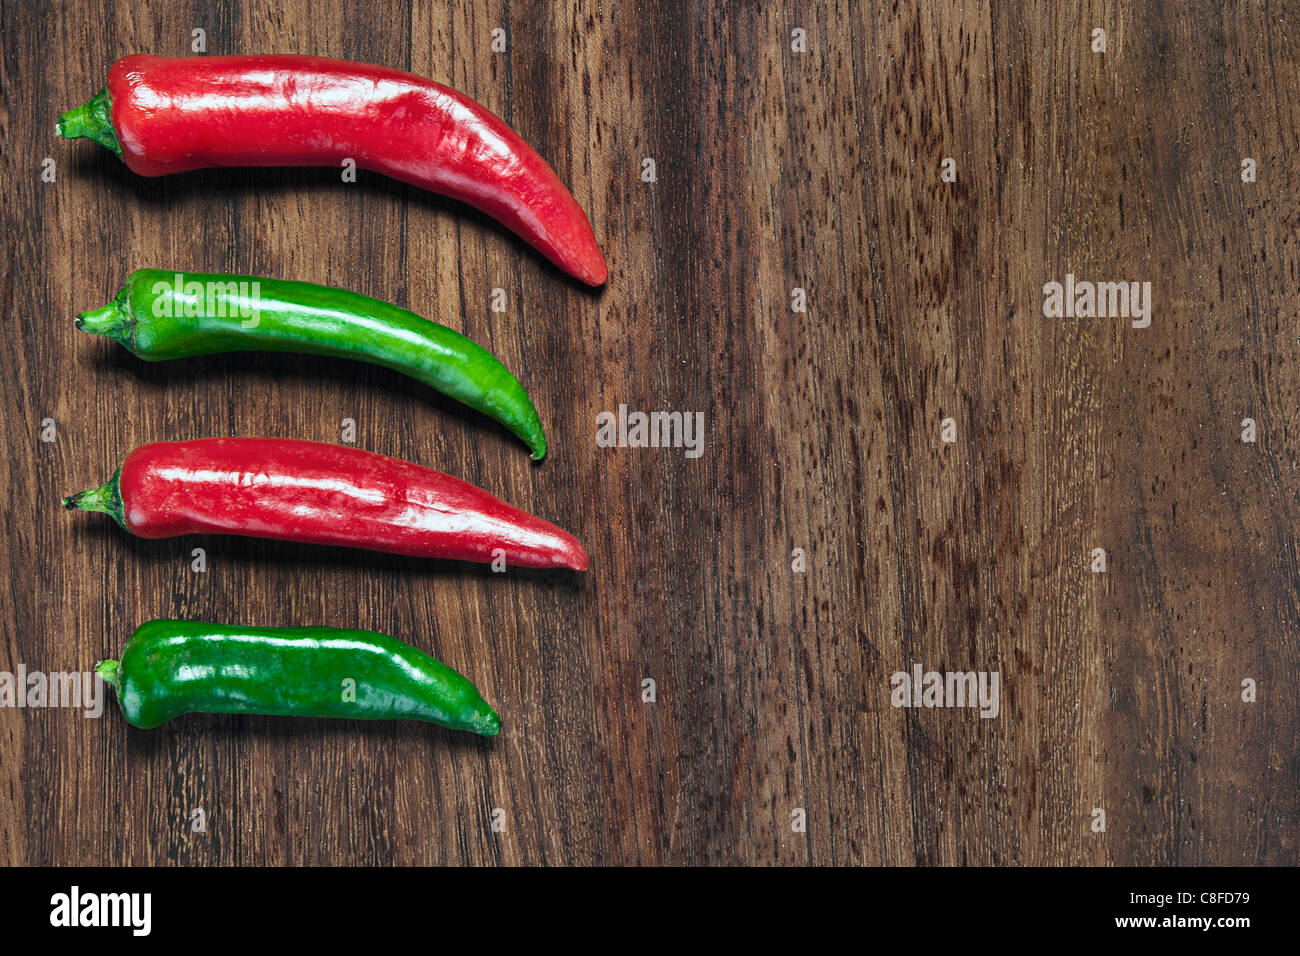 Green and Red Chillis on Chopping Board Stock Photo